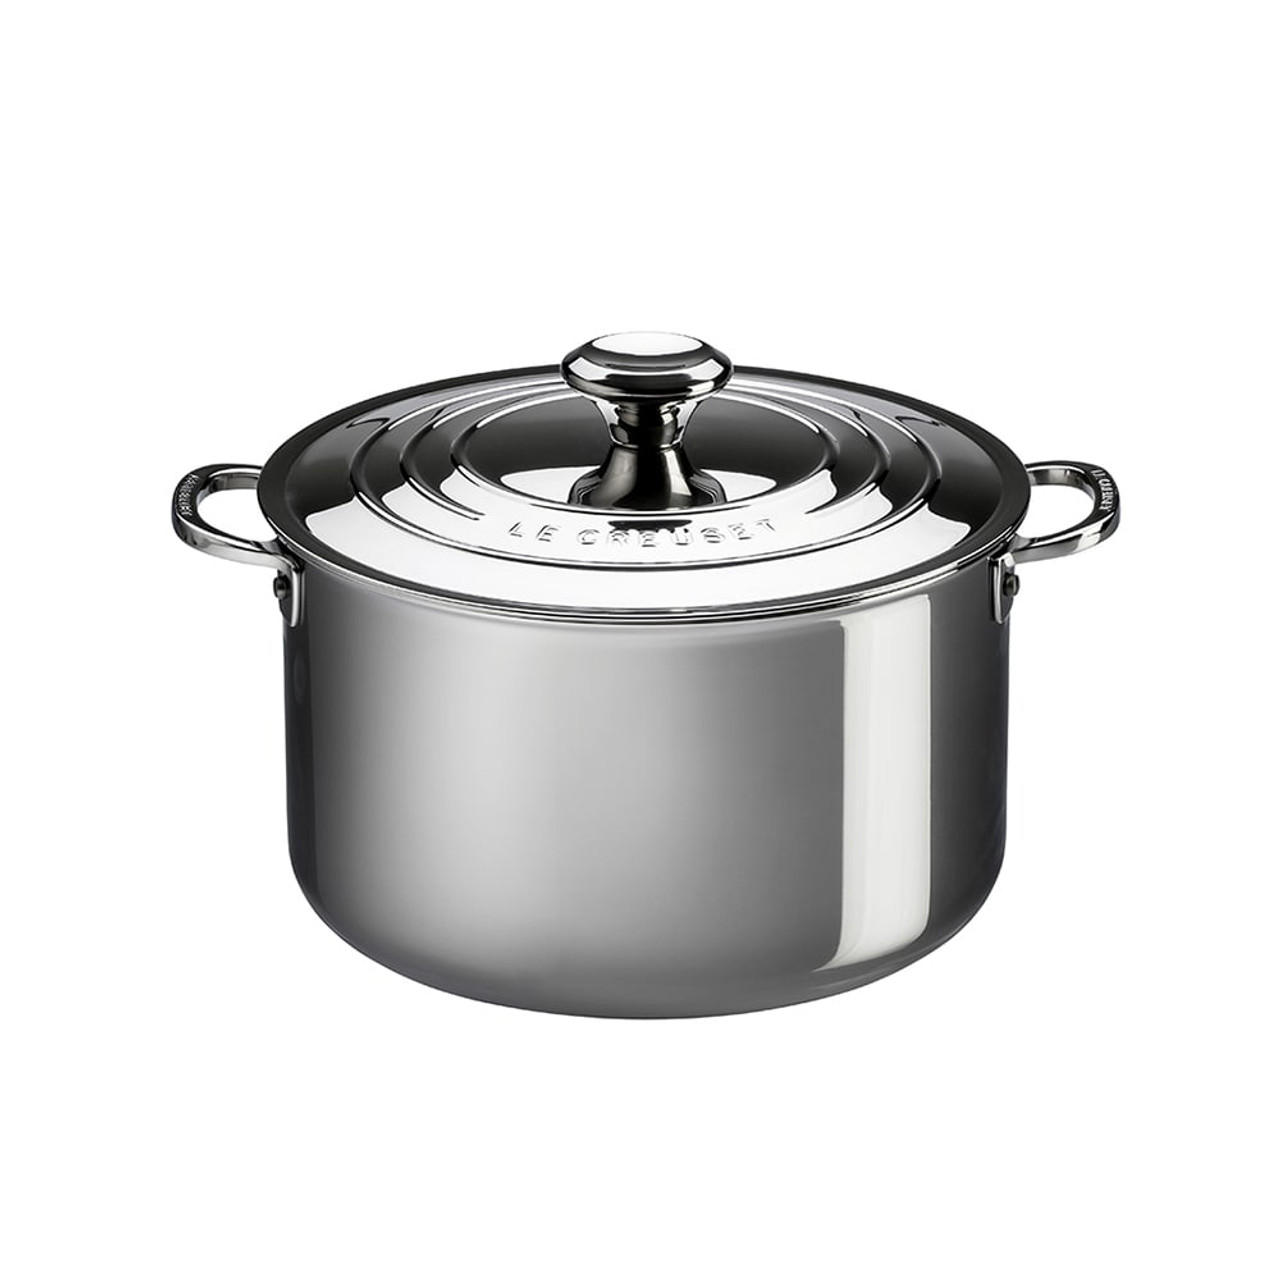 Le Creuset Stainless Steel Stockpot | Chefs Corner Store